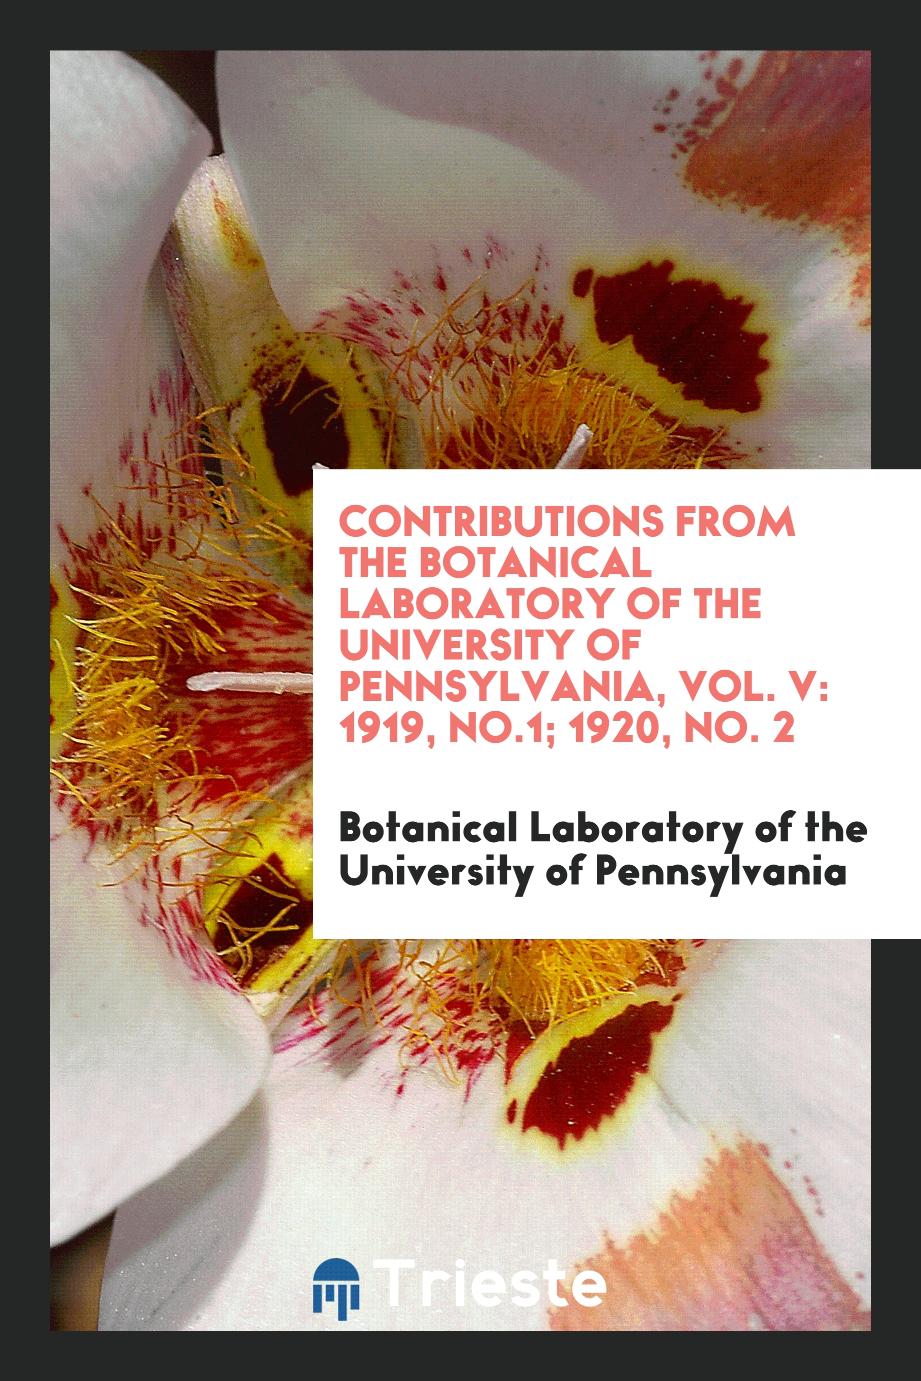 Contributions from the Botanical Laboratory of the University of Pennsylvania, Vol. V: 1919, No.1; 1920, No. 2